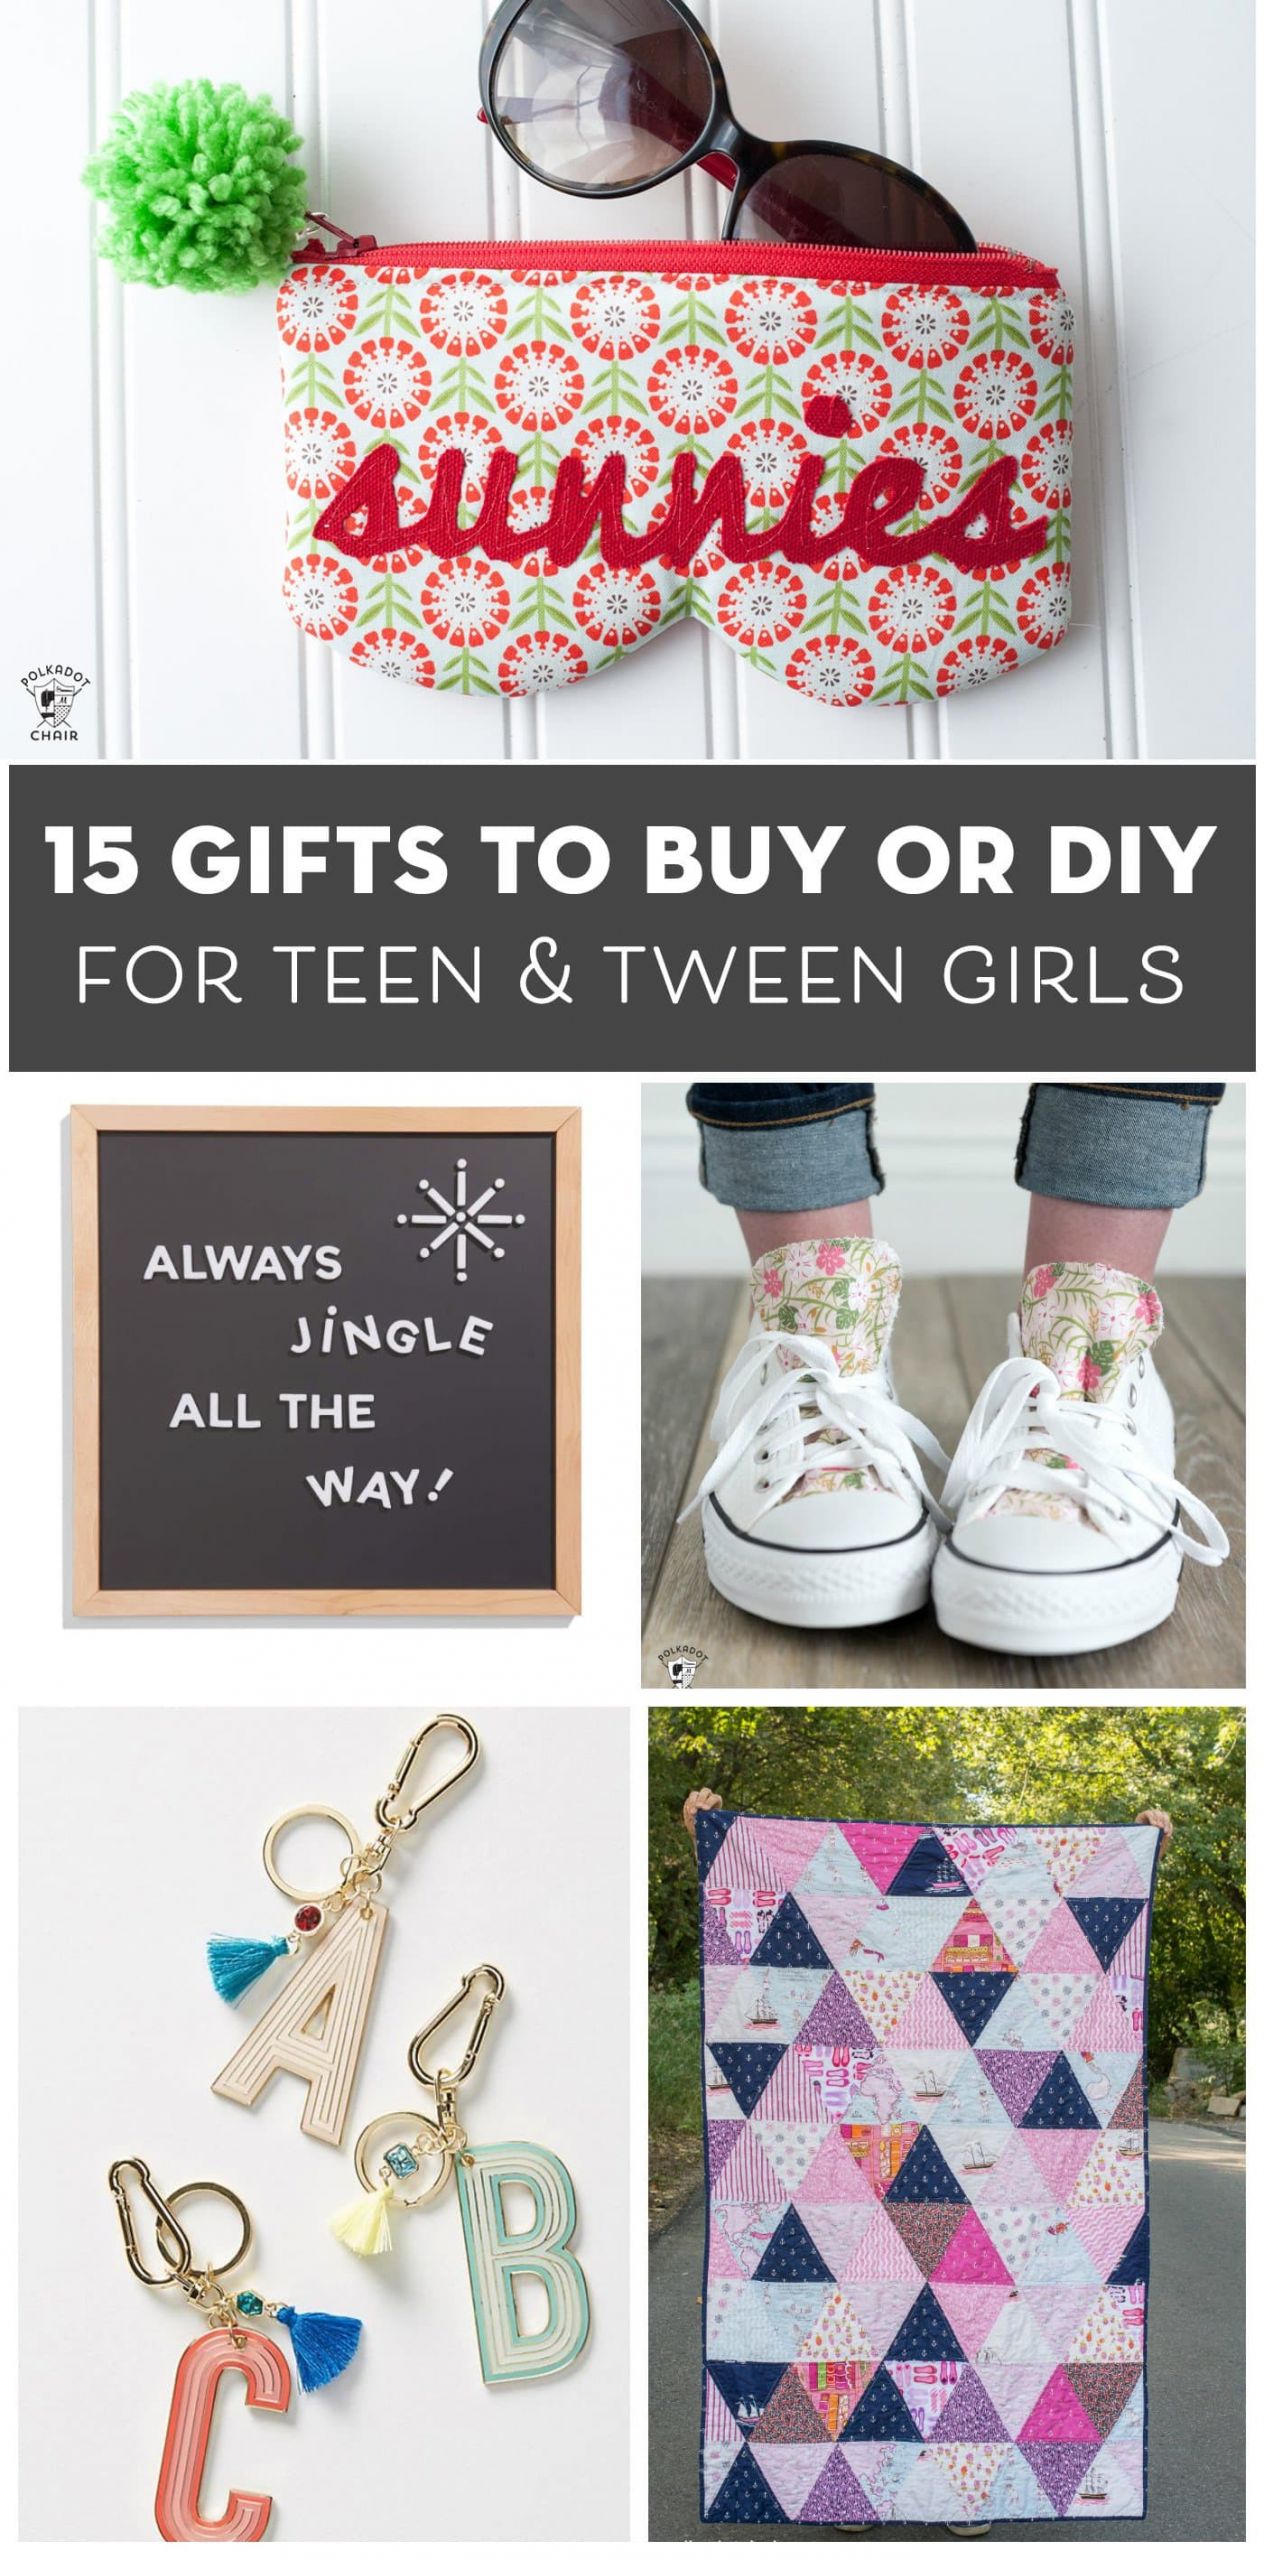 Gift Ideas Teen Girls
 15 Gift Ideas for Teenage Girls That You Can DIY or Buy